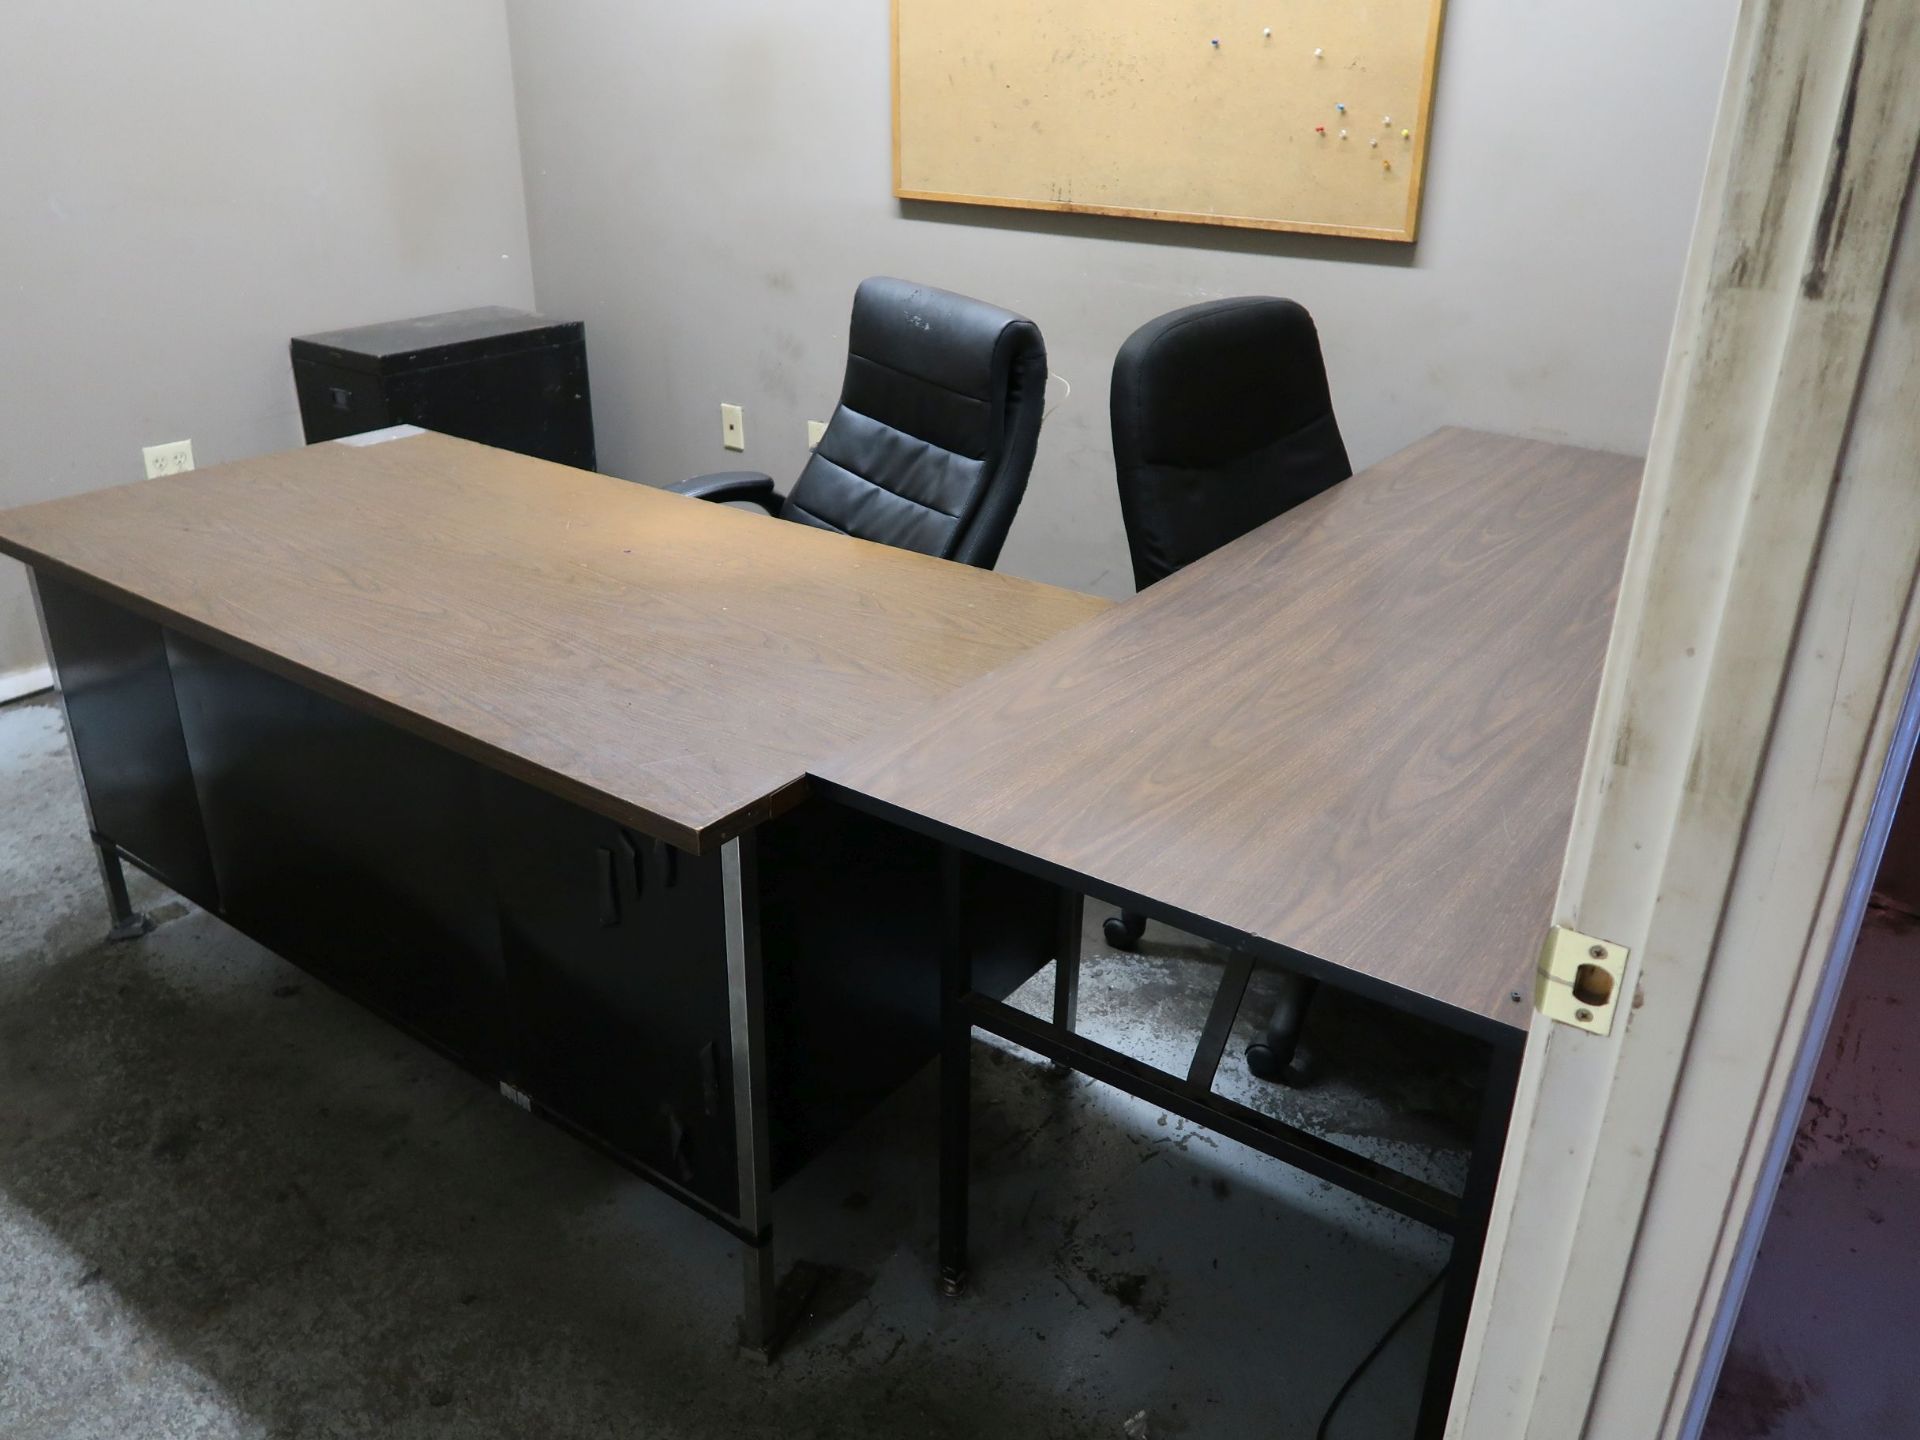 (LOT) CONTENTS OF OFFICE AND MISCELLANEOUS OFFICE FURNITURE